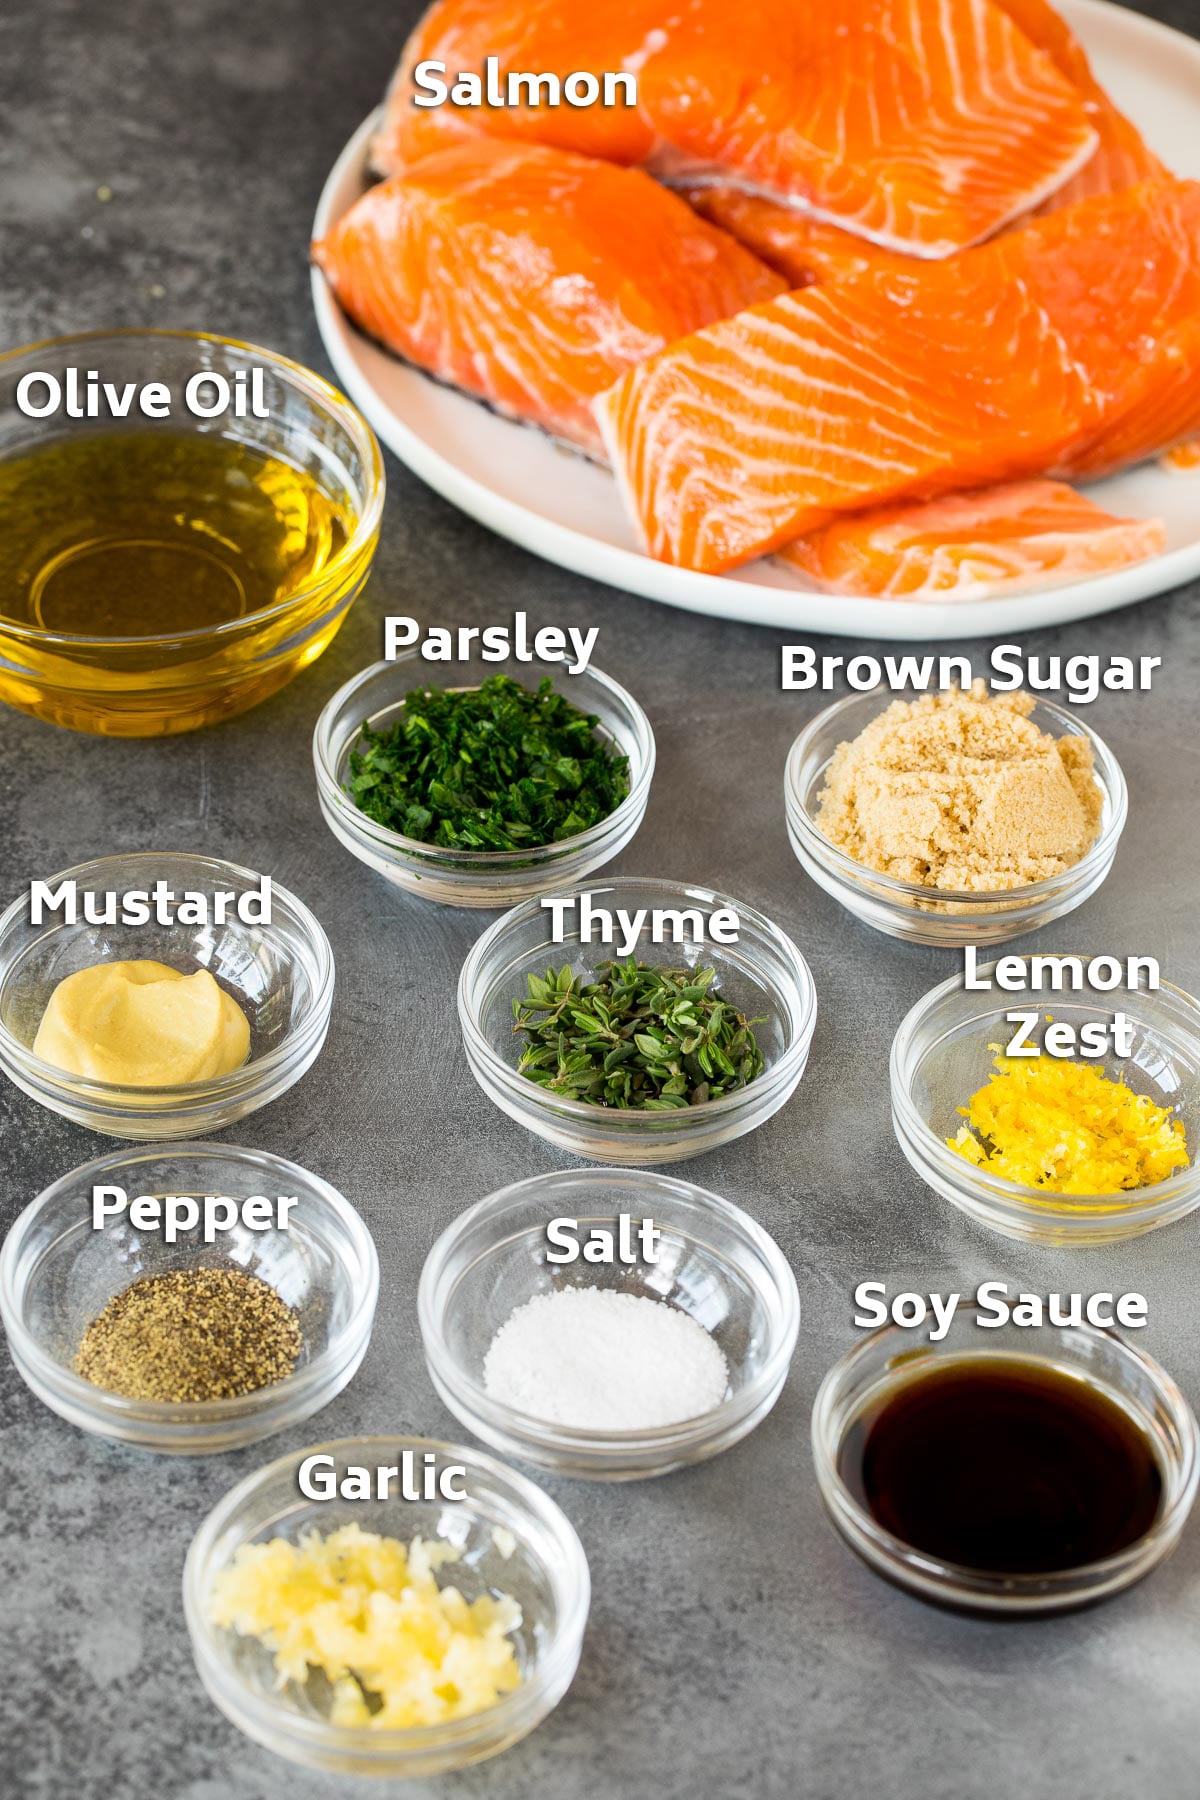 Ingredients including salmon fillets, olive oil, soy sauce, herbs and spices.